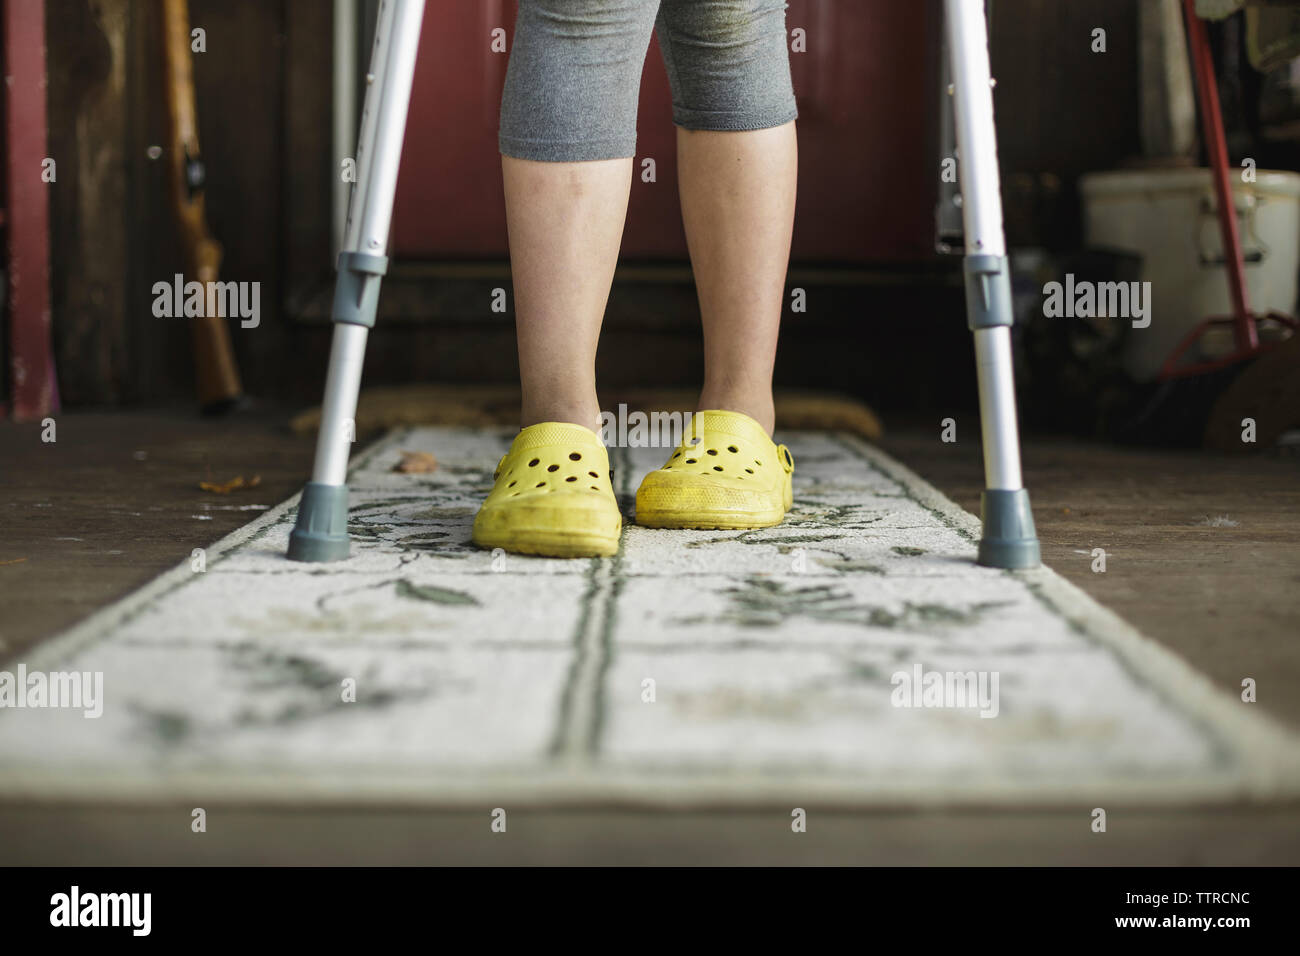 Low section of girl with crutches standing on rug at home Stock Photo